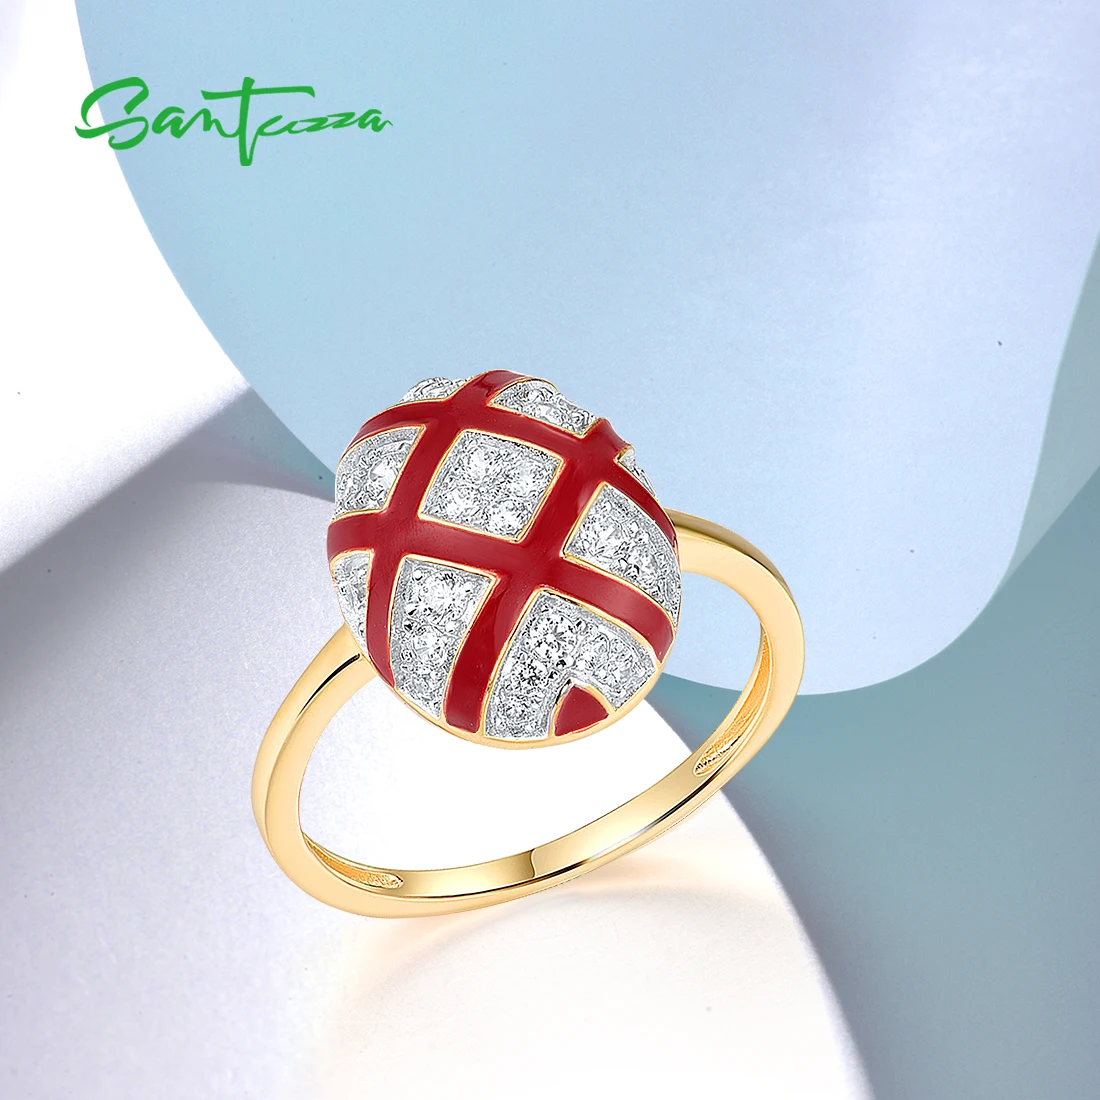 SANTUZZA Pure 925 Sterling Silver Rings For Women Sparkling White CZ Red Oval Cross Enamel Wedding Engagement Fine Jewelry Set